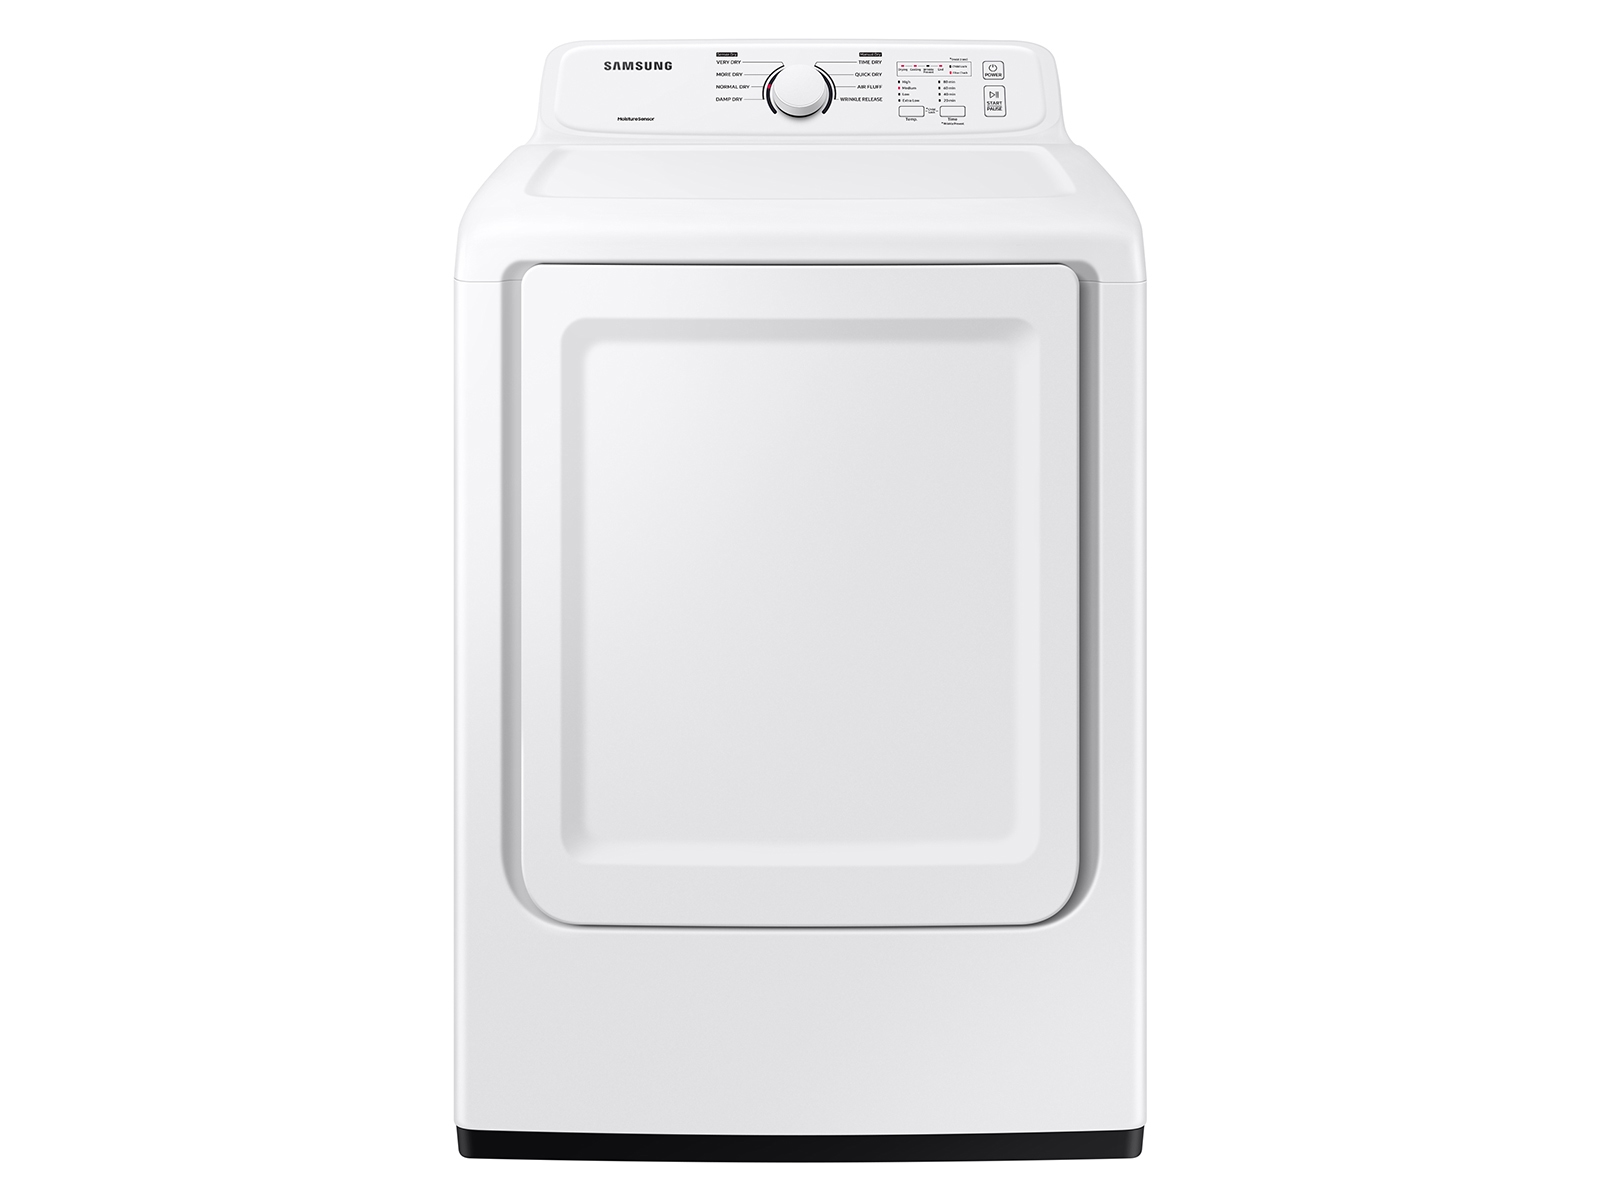 Samsung 7.2 cu. ft. Electric Dryer with Sensor Dry and 8 Drying Cycles in White(DVE41A3000W/A3)